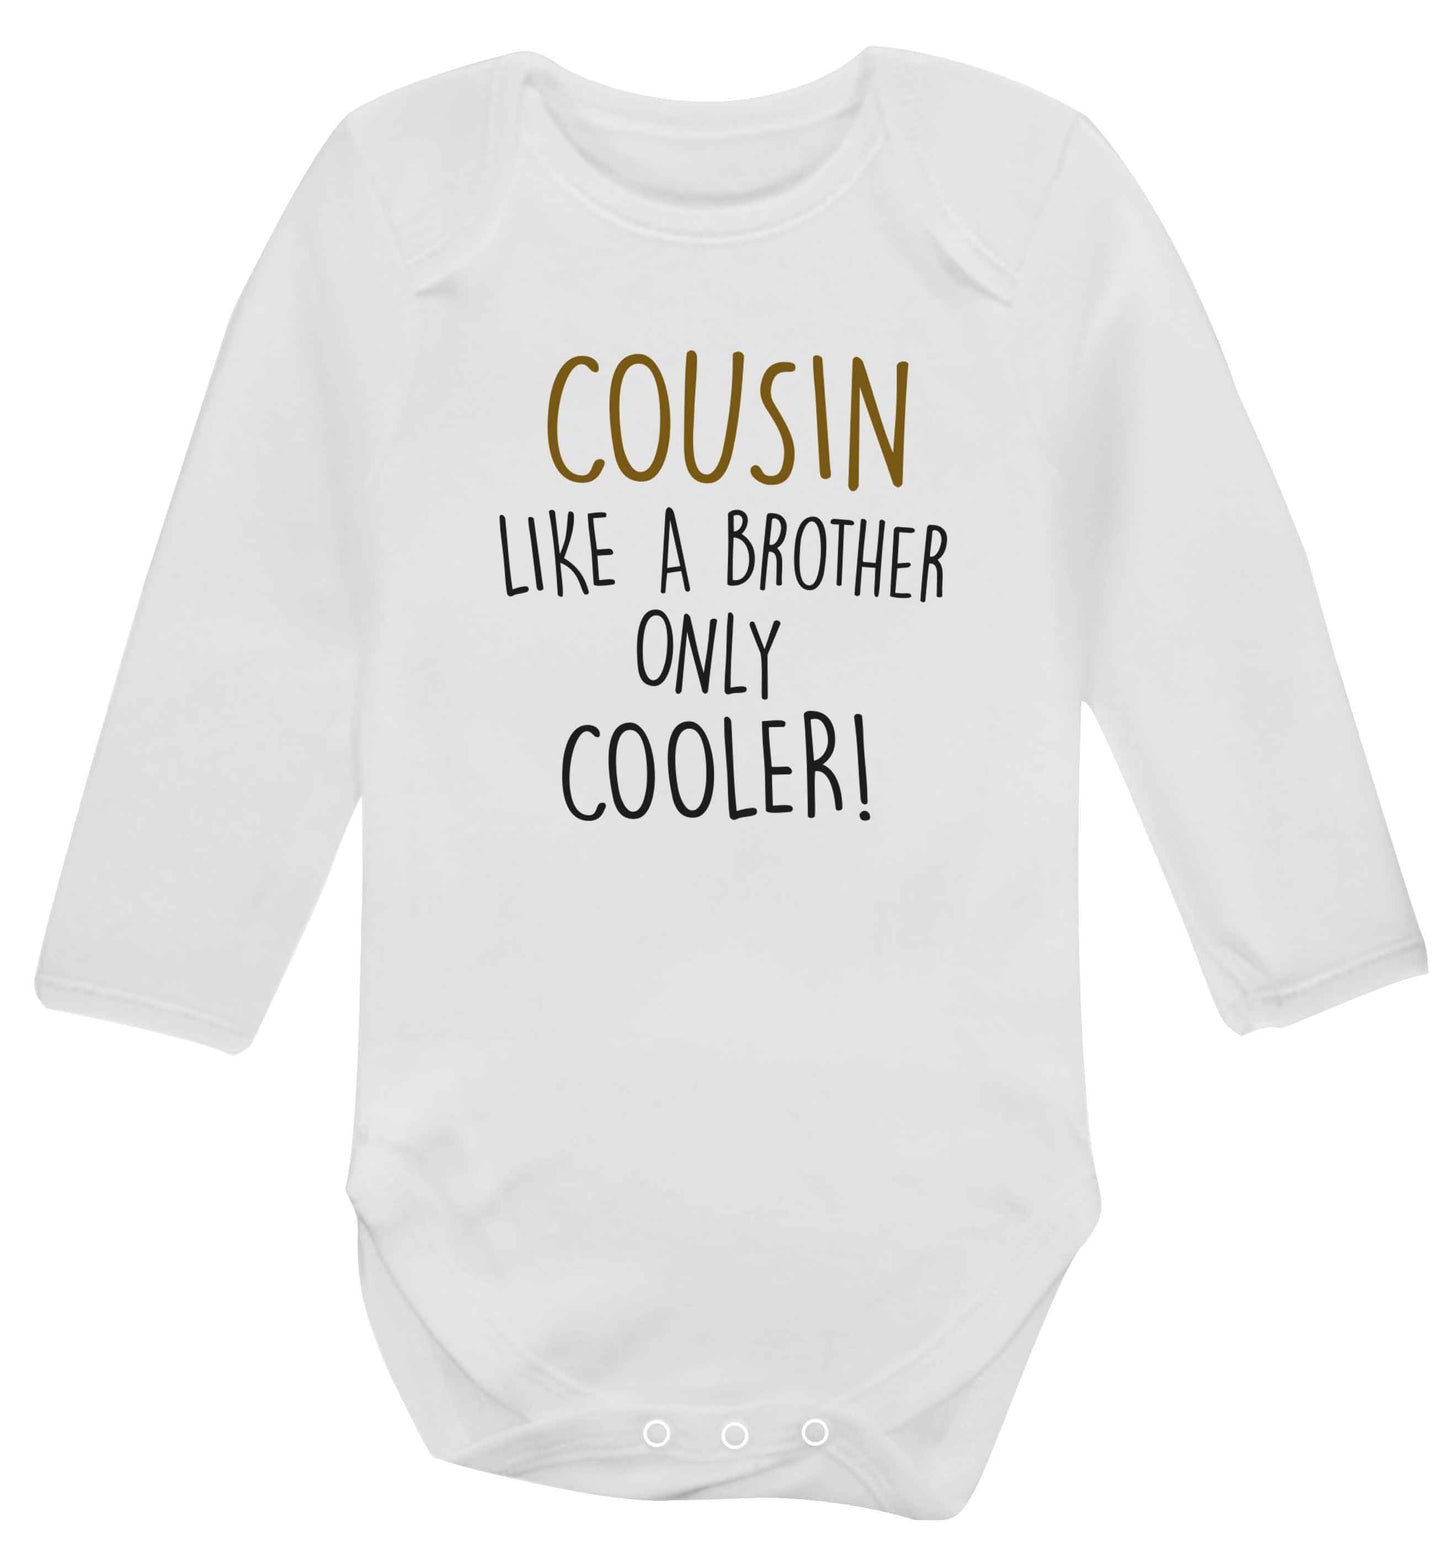 Cousin like a brother only cooler baby vest long sleeved white 6-12 months